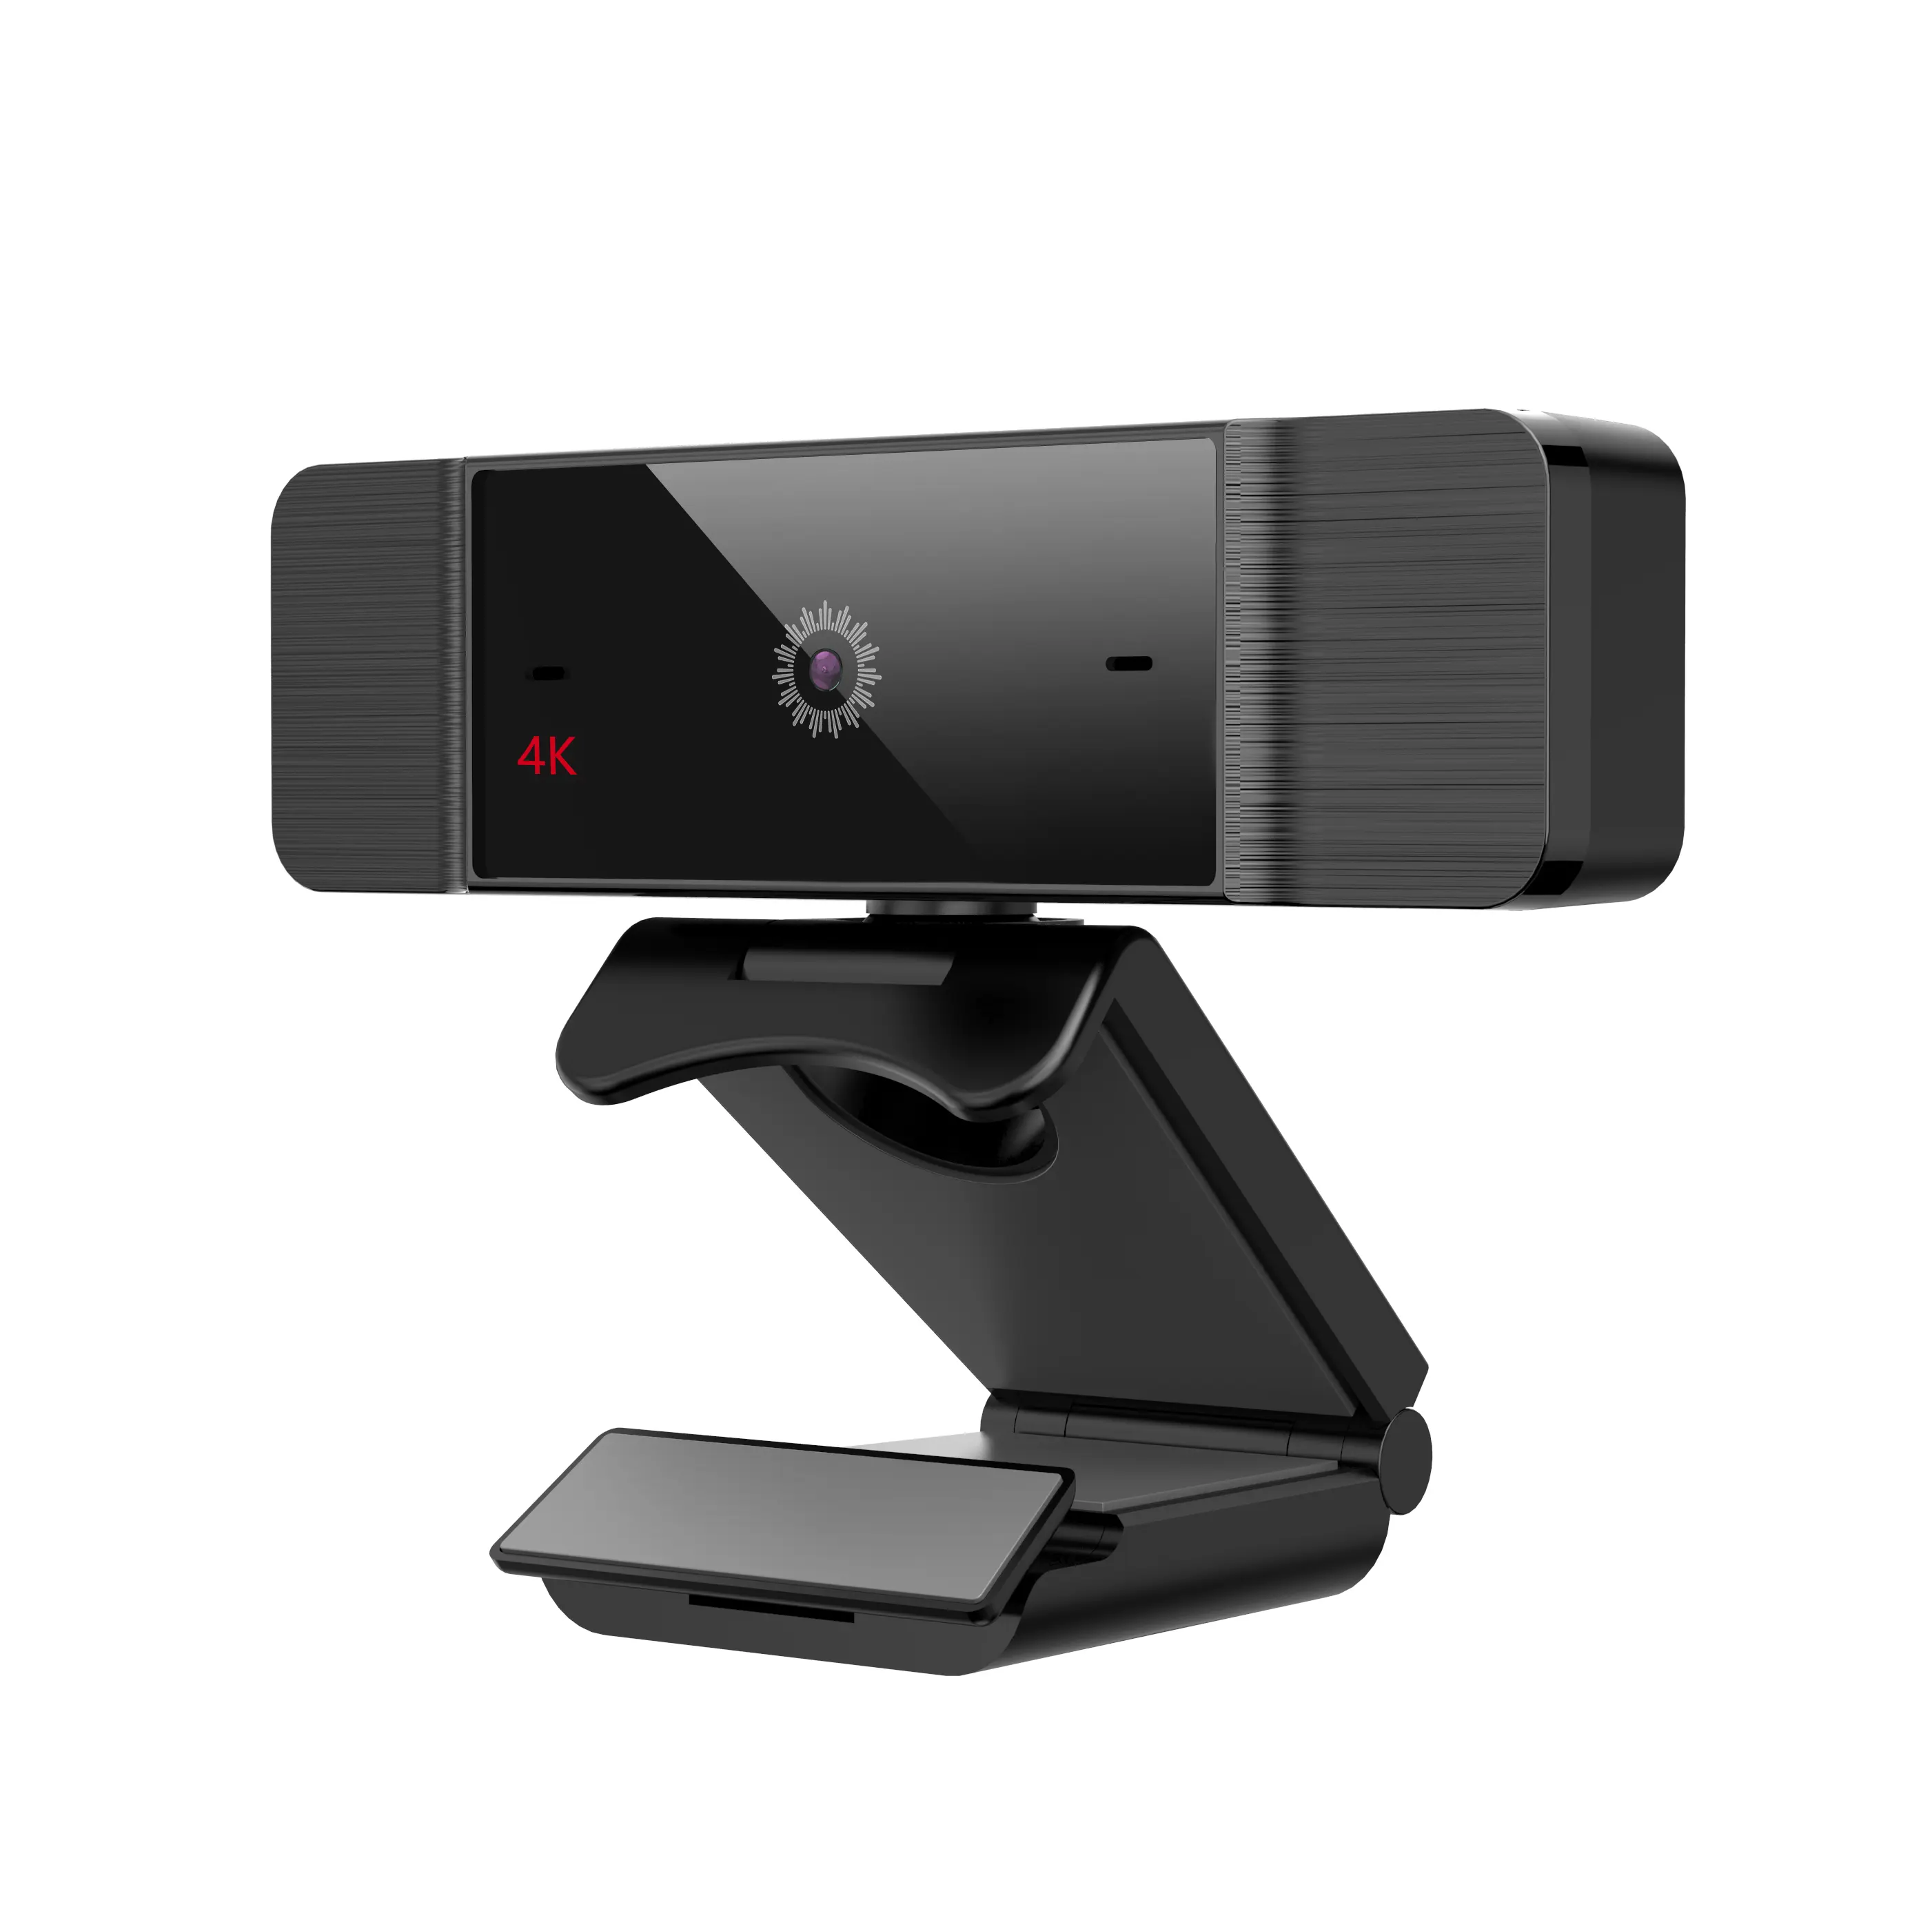 New Arrival Webcam 4K Full High Definition USB Webcam With Microphone